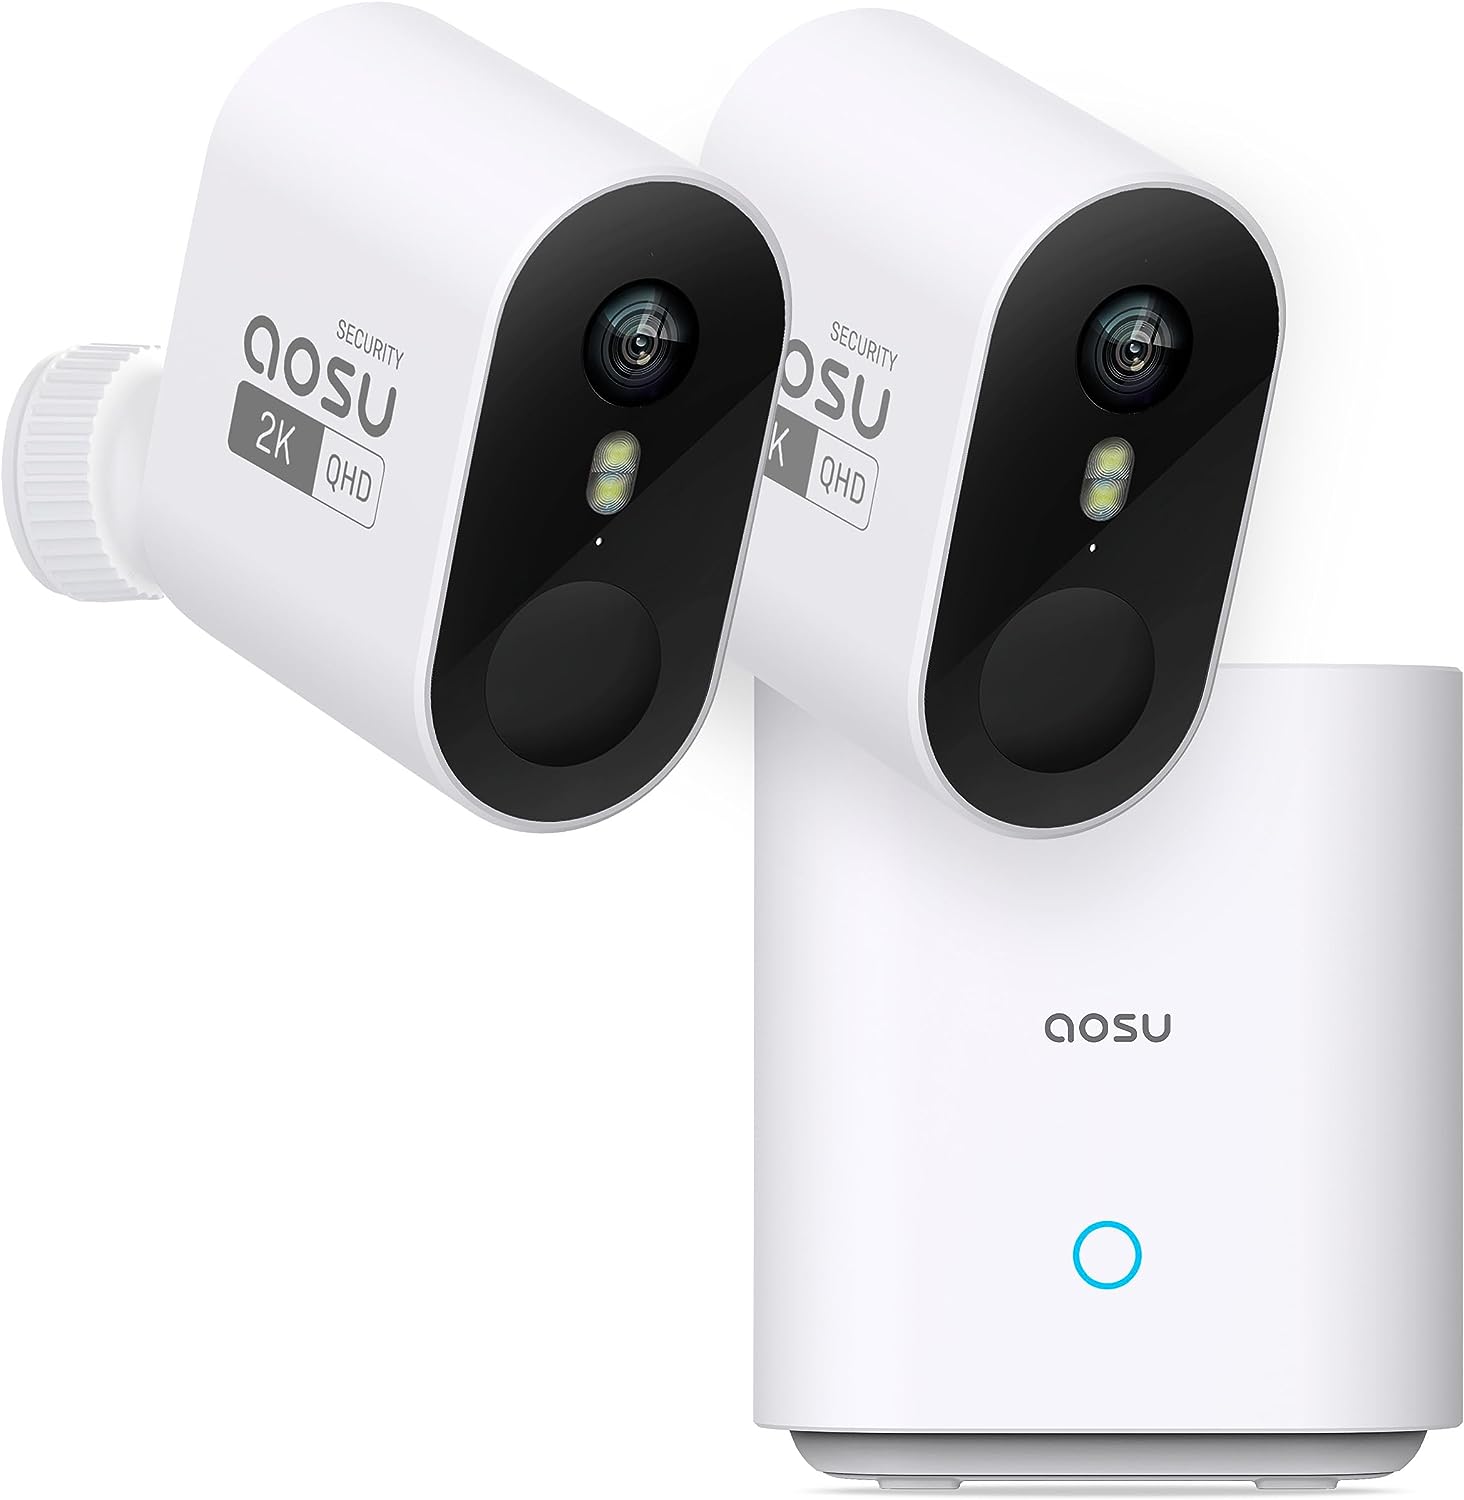 Read more about the article AOSU Security Cameras Wireless Outdoor Home System, Real 2K HD Night Vision, No Subscription, Spotlight & Sound Alarm for ONLY $149.98 (Was $299.99)